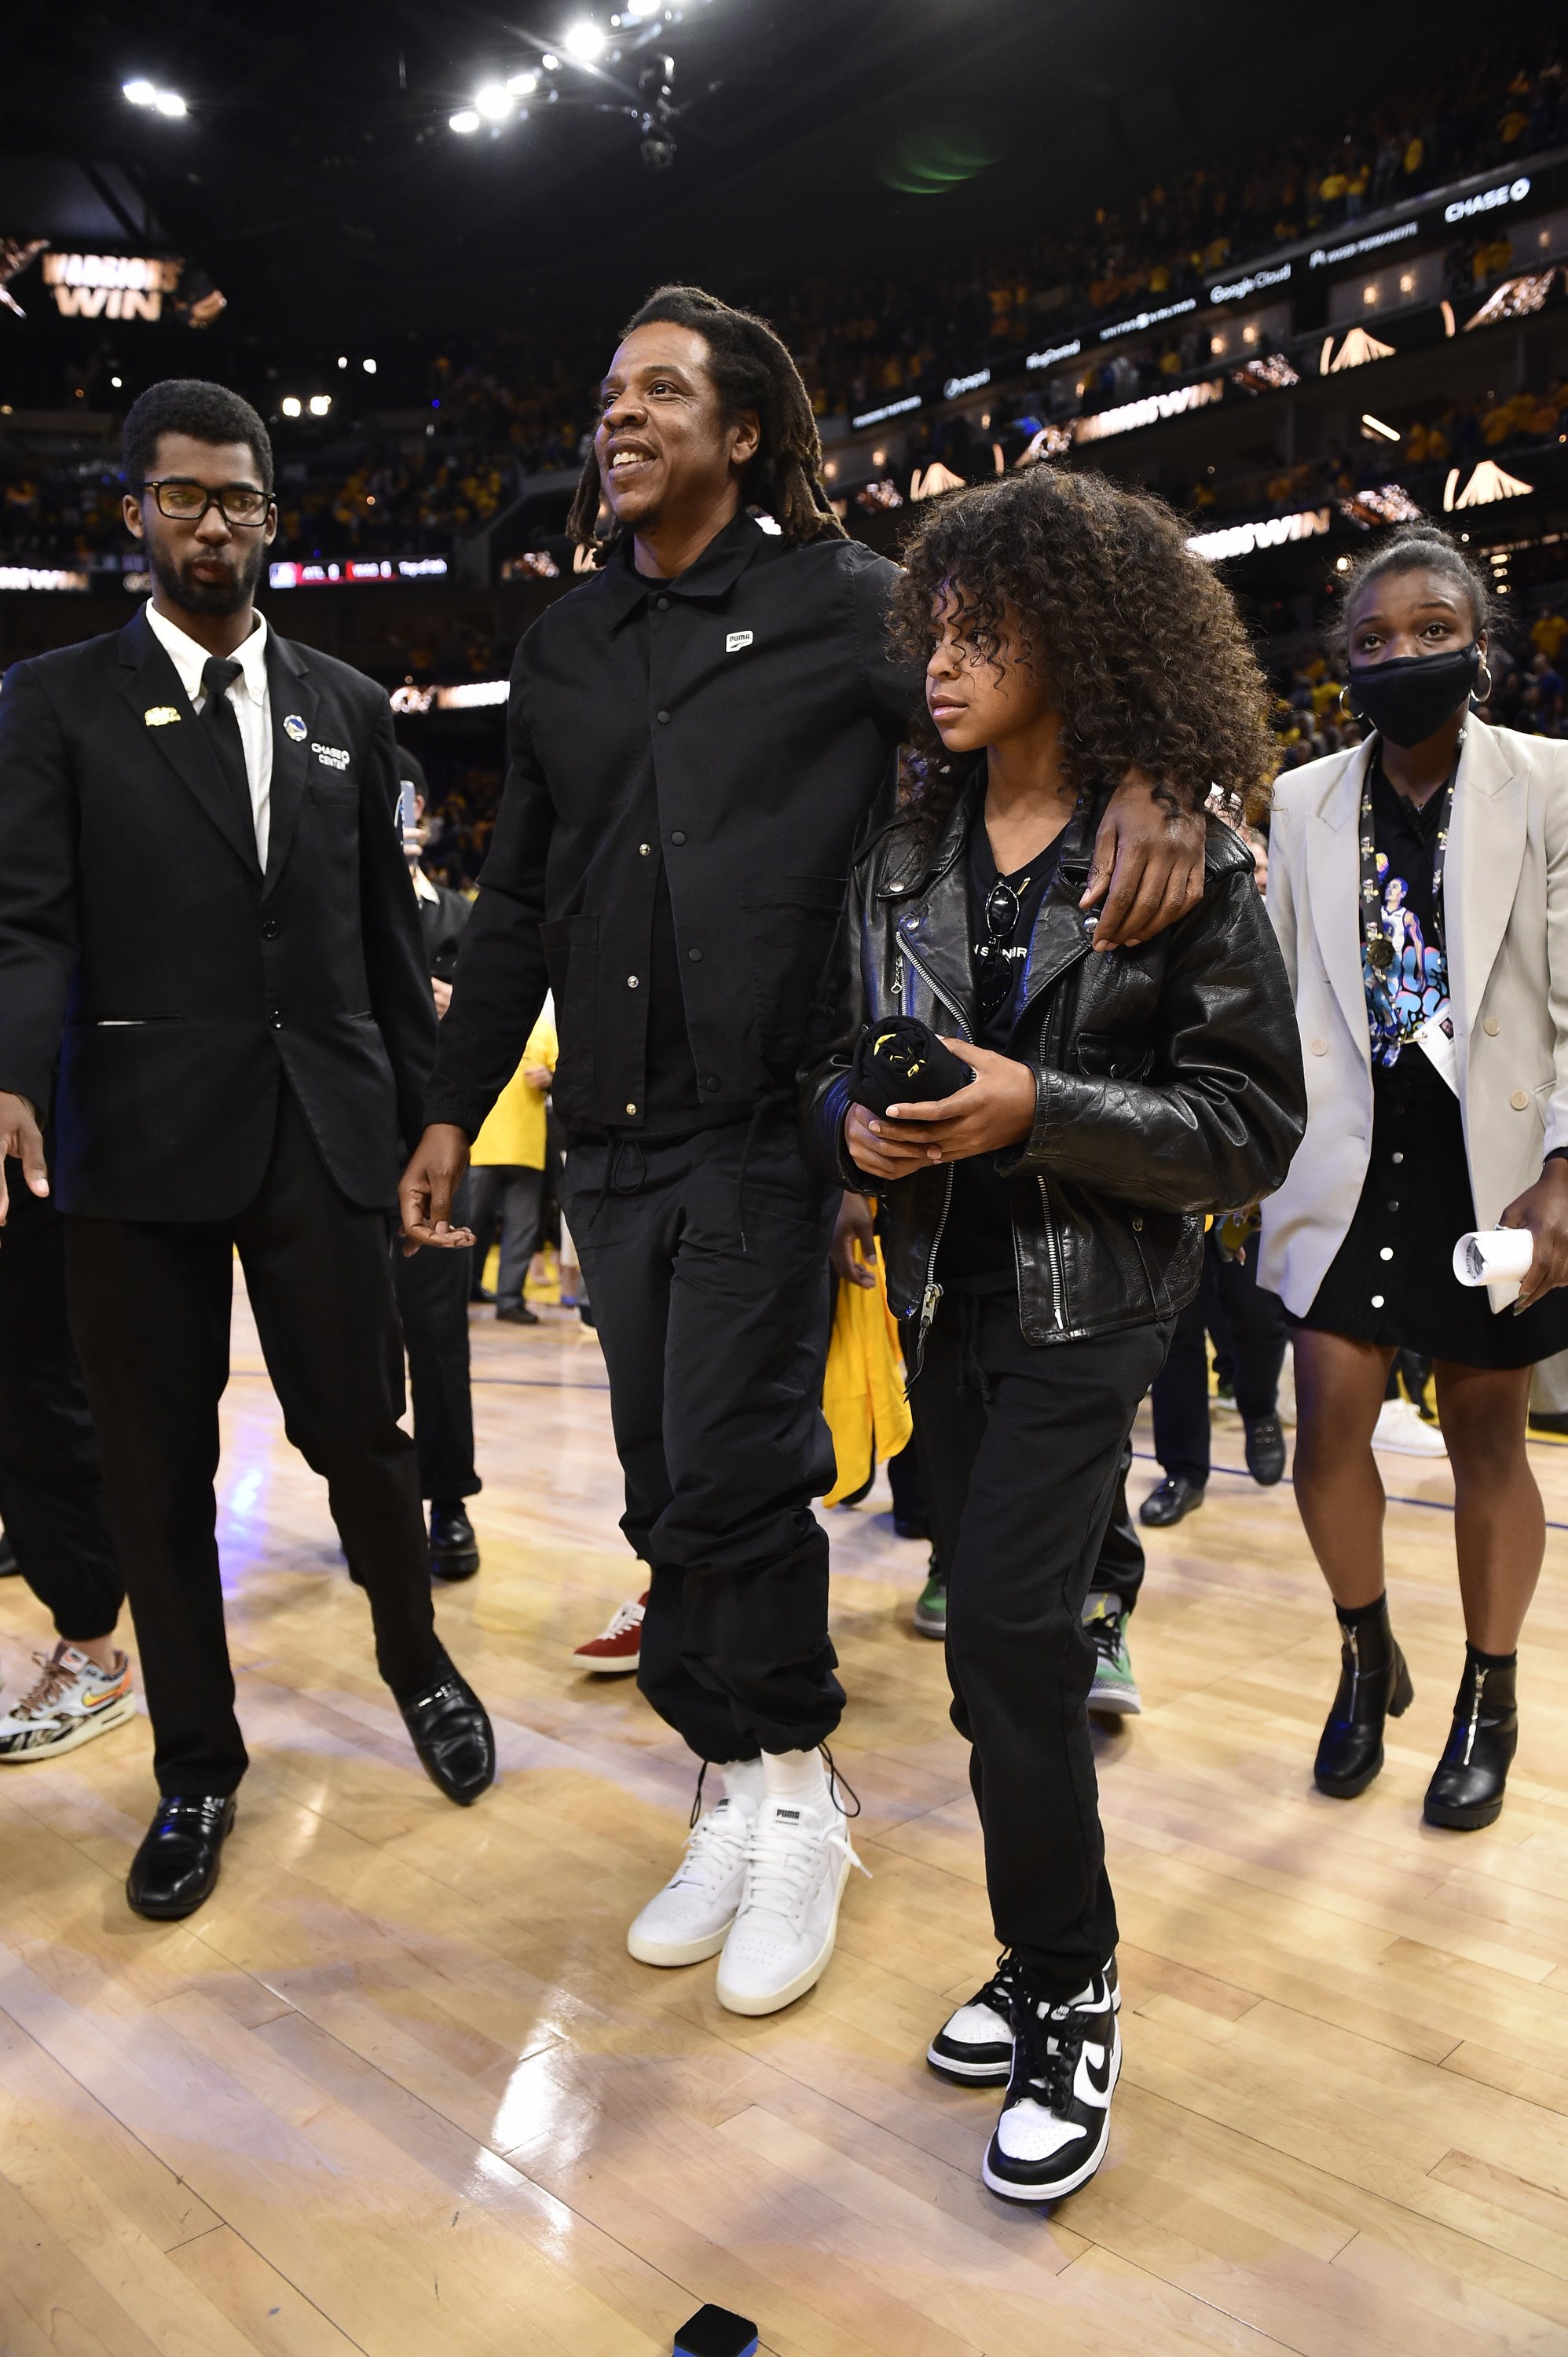 Jay-Z and Blue Ivy on the actual court, with security personnel around them